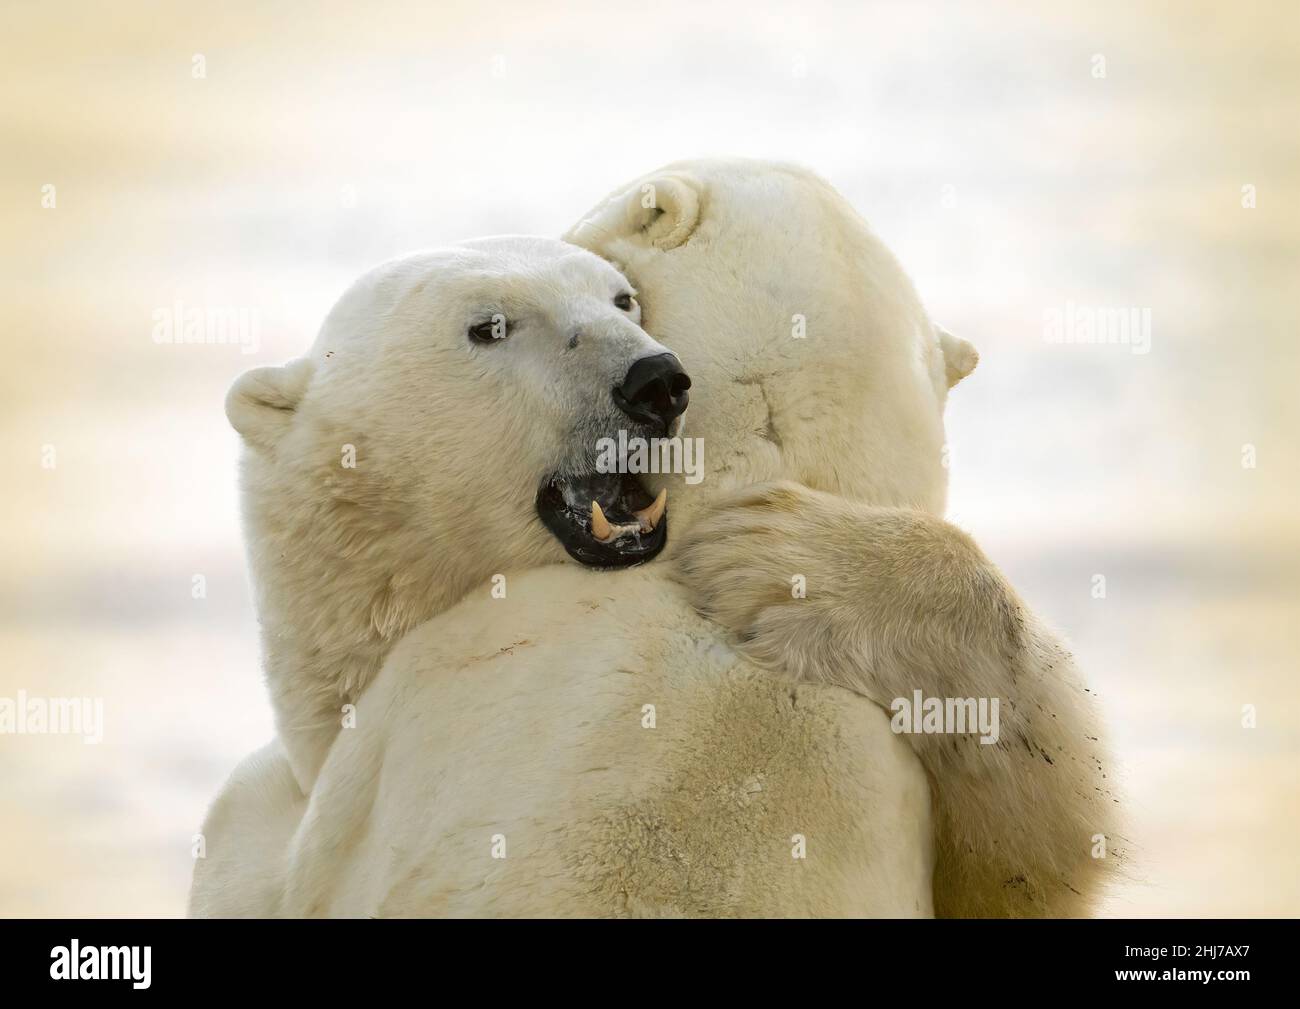 two polar bears play and spar on the tundra whilst waiting for the autumn ice to freeze Stock Photo